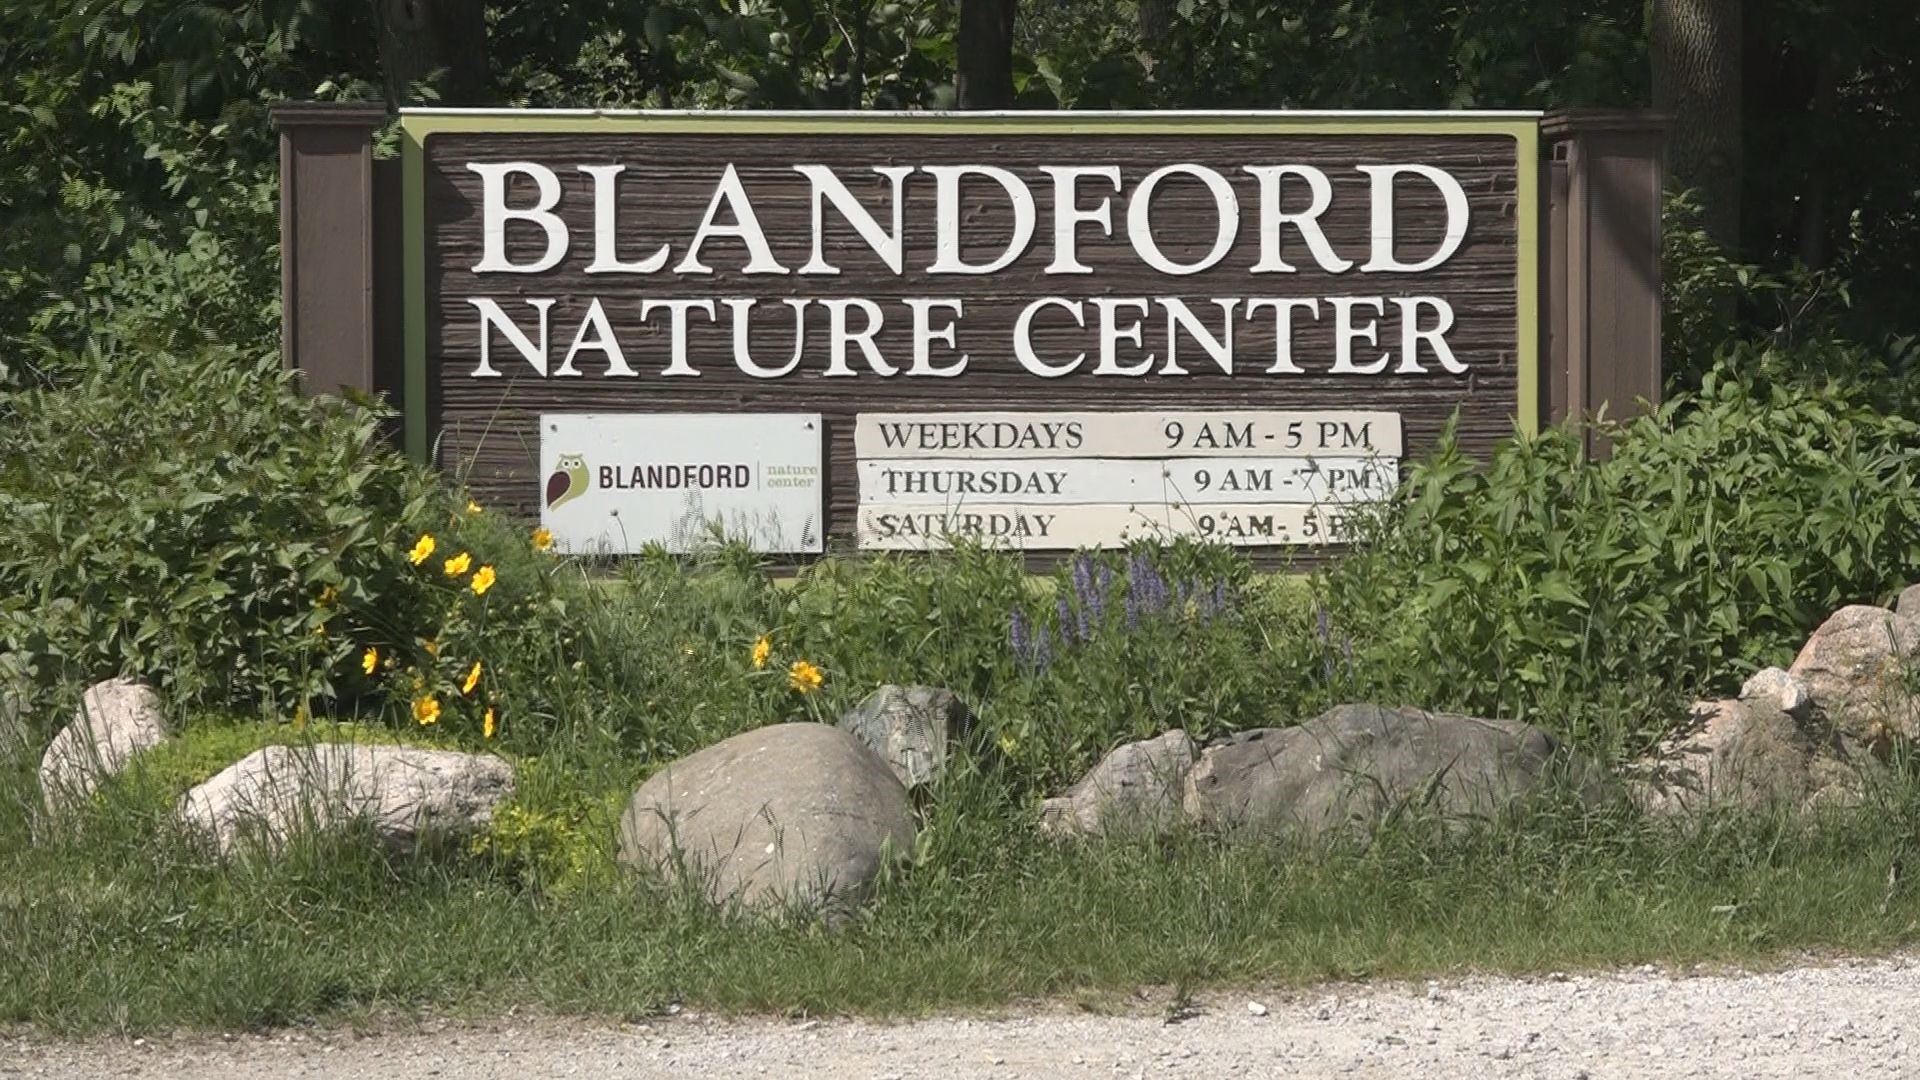 Blandford Nature Center has many volunteer opportunities throughout the season and different options available for those who want to help out. Right now, the organization is looking for volunteers to help out with their Harvest Festival.